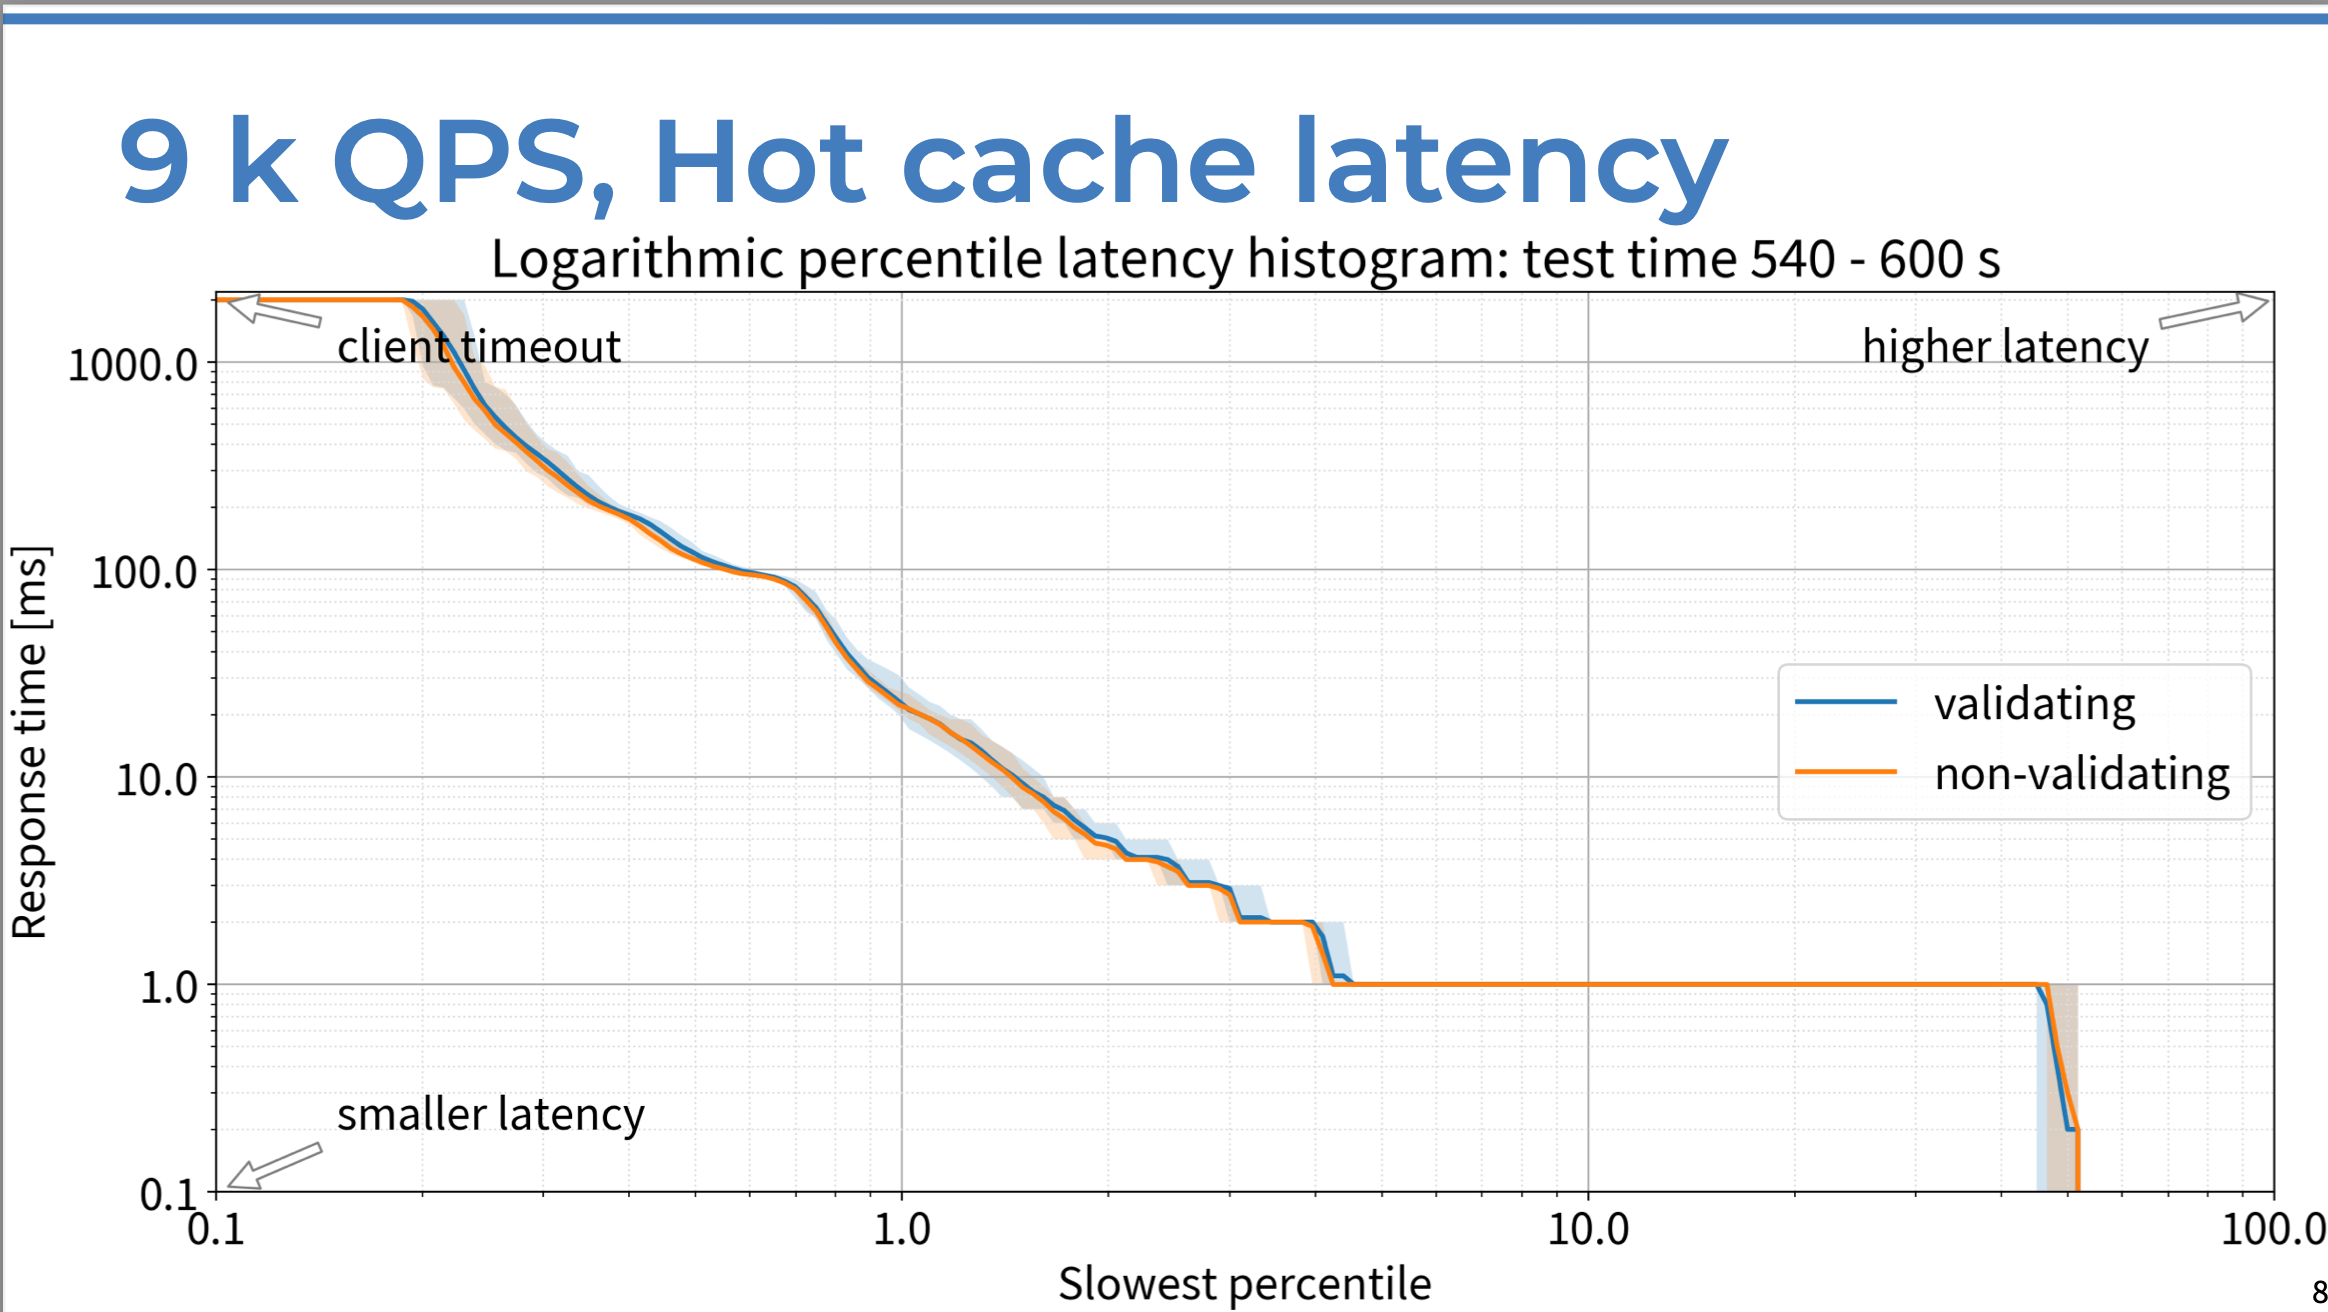 Logorithmic percentile latency histogram of response time (in ms) vs. slowest percentile of responses, comparing DNSSEC-validating resolver response to non-validating server response with 9K QPS and a hot cache.